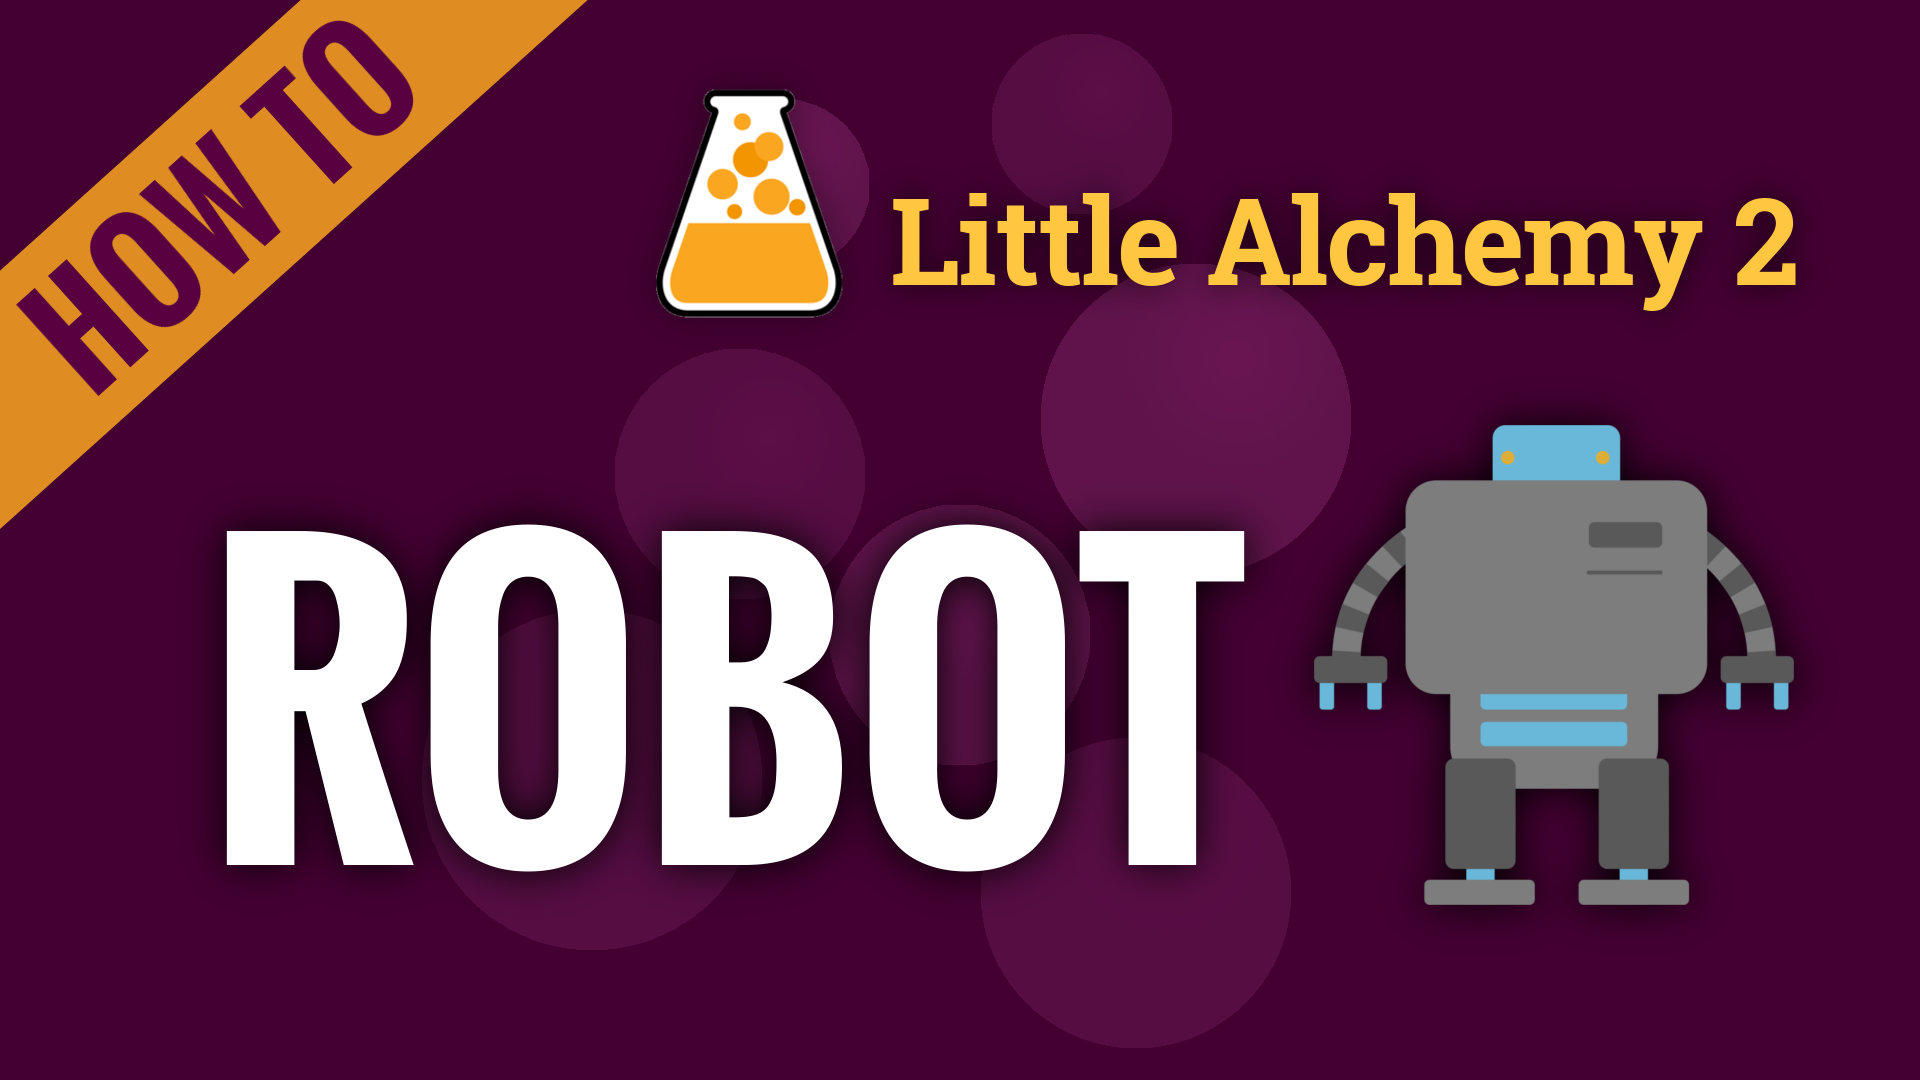 How To Make Robot In Little Alchemy